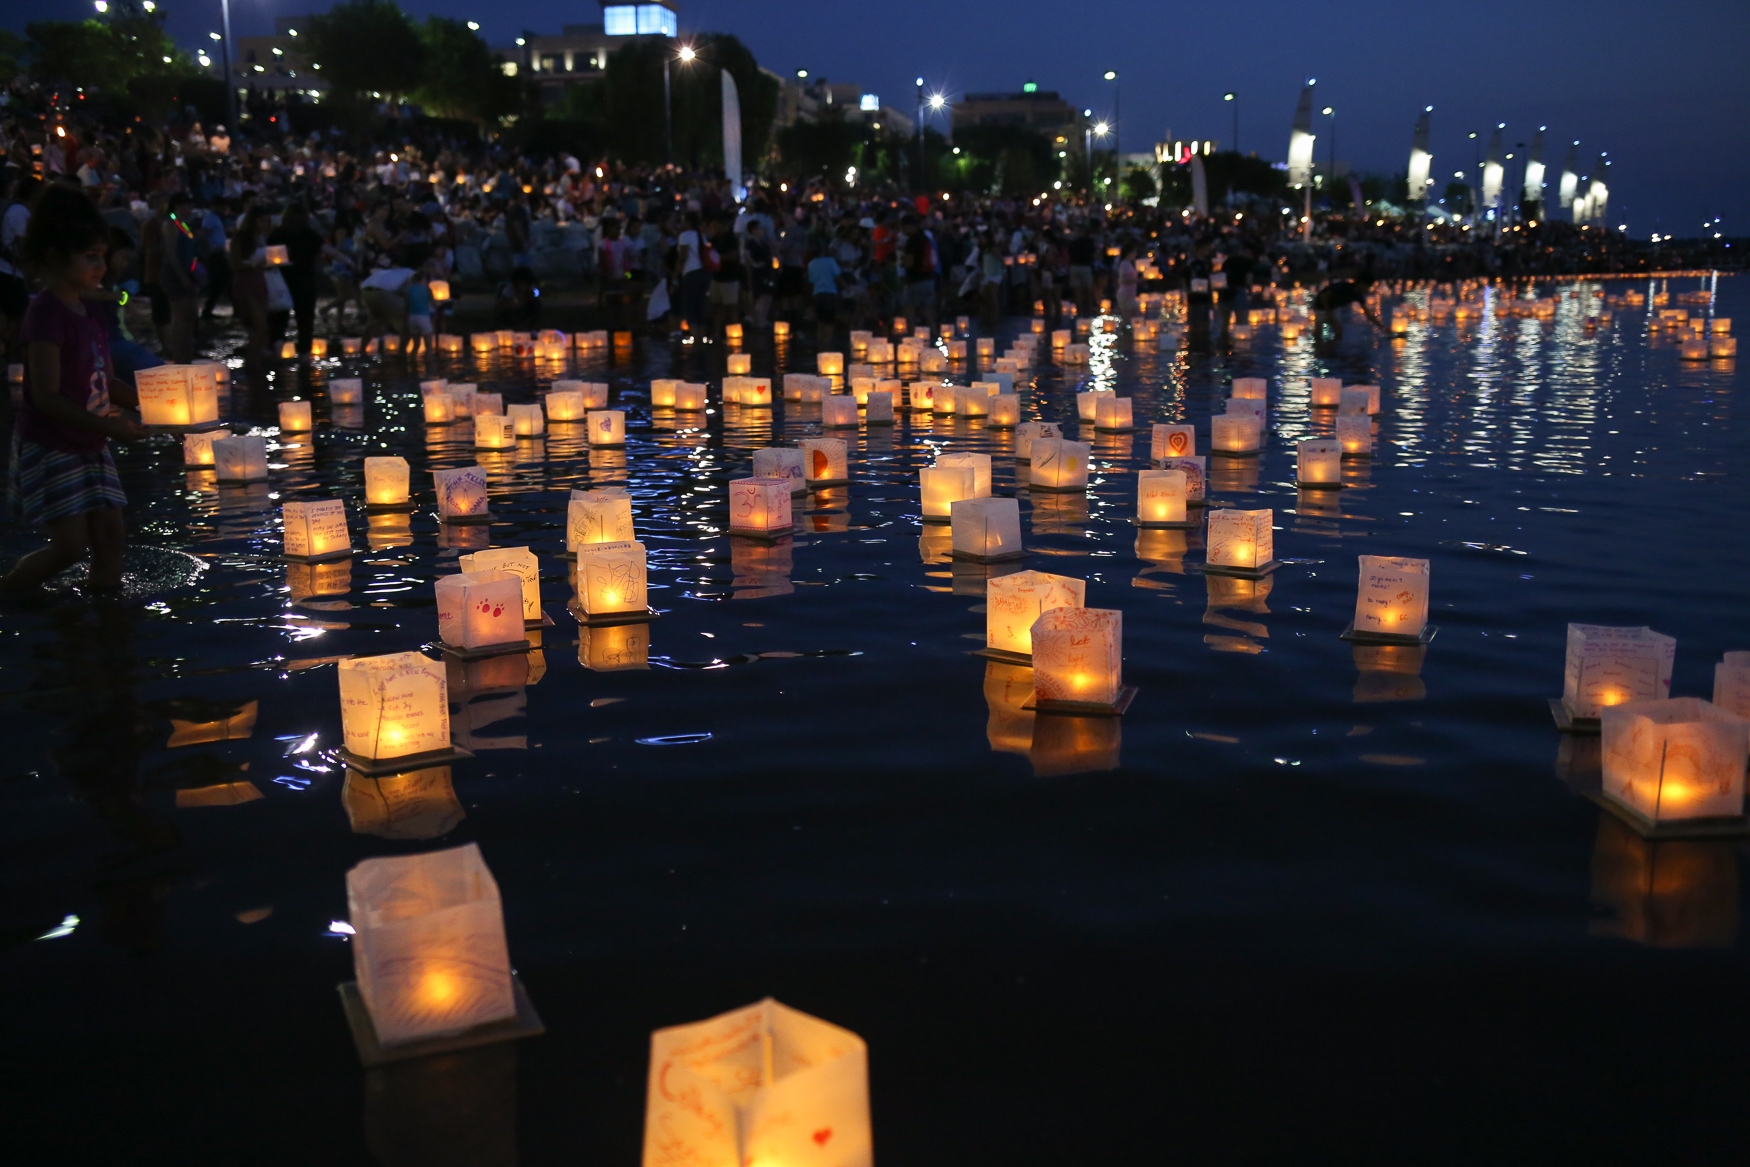 National Harbor was illuminated by lanterns and it was pretty magical